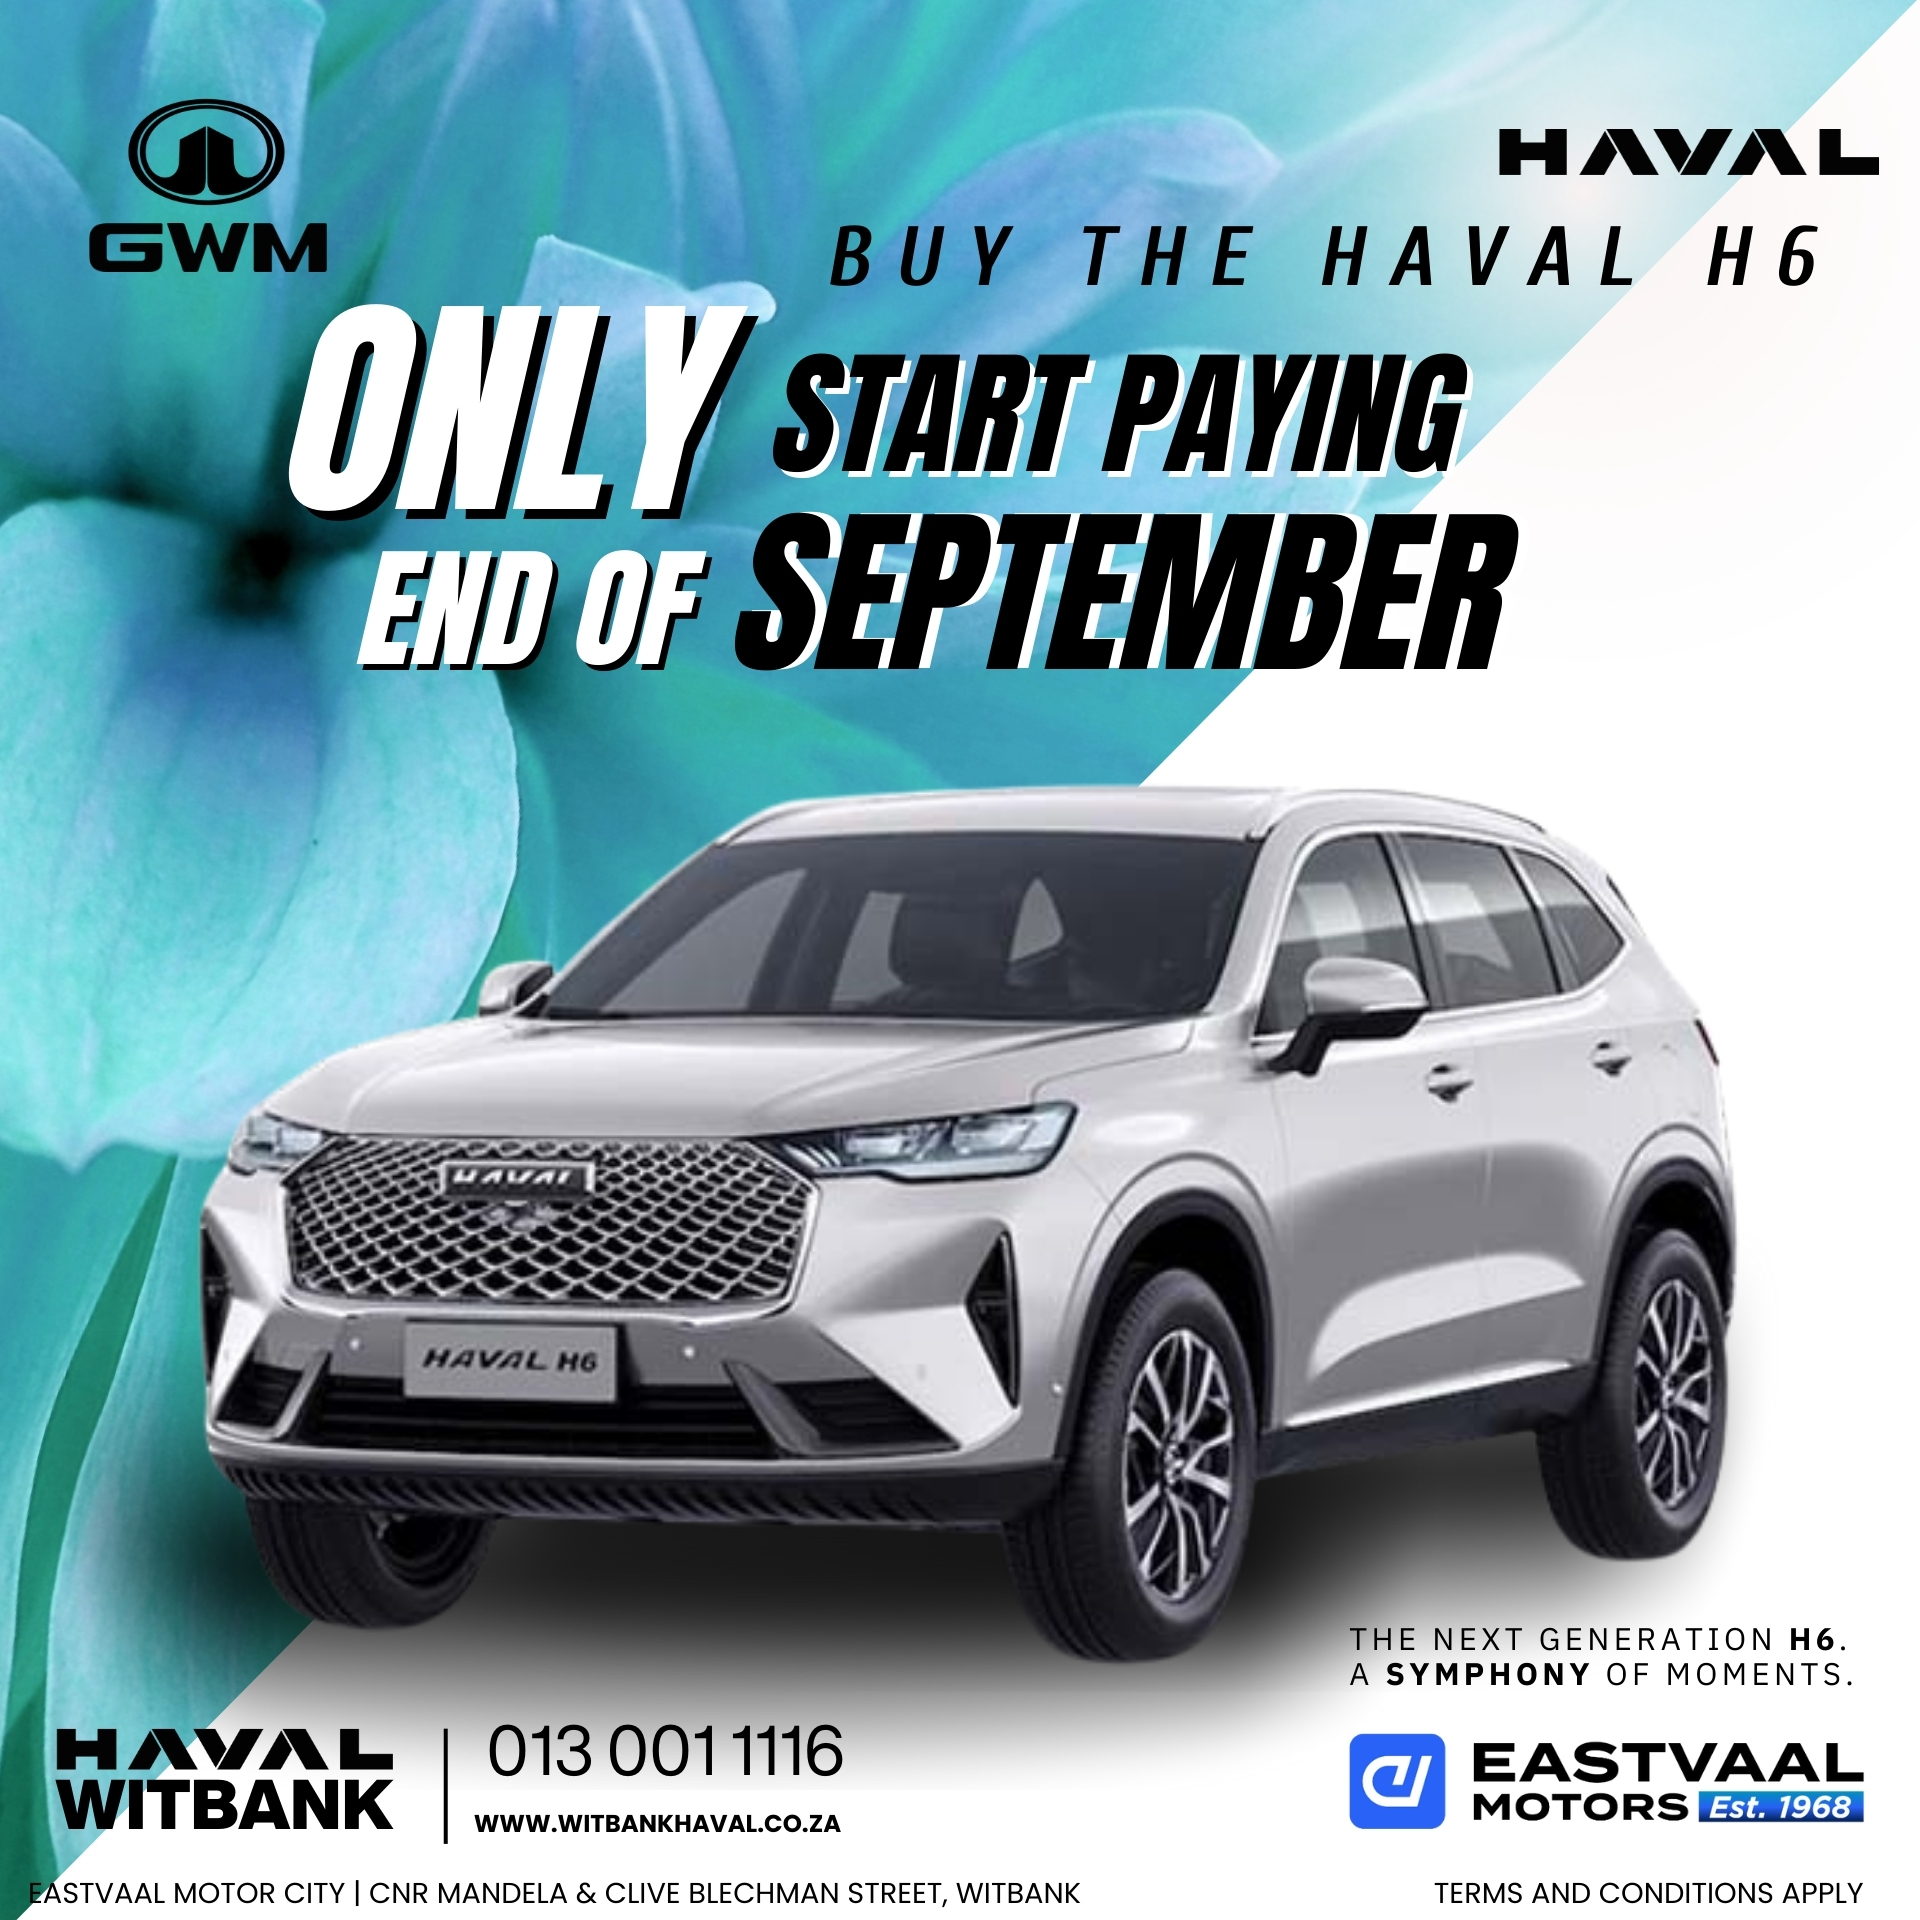 Upgrade to luxury this July with a Haval GWM. Exceptional value, unmatched performance! image from Eastvaal Motors